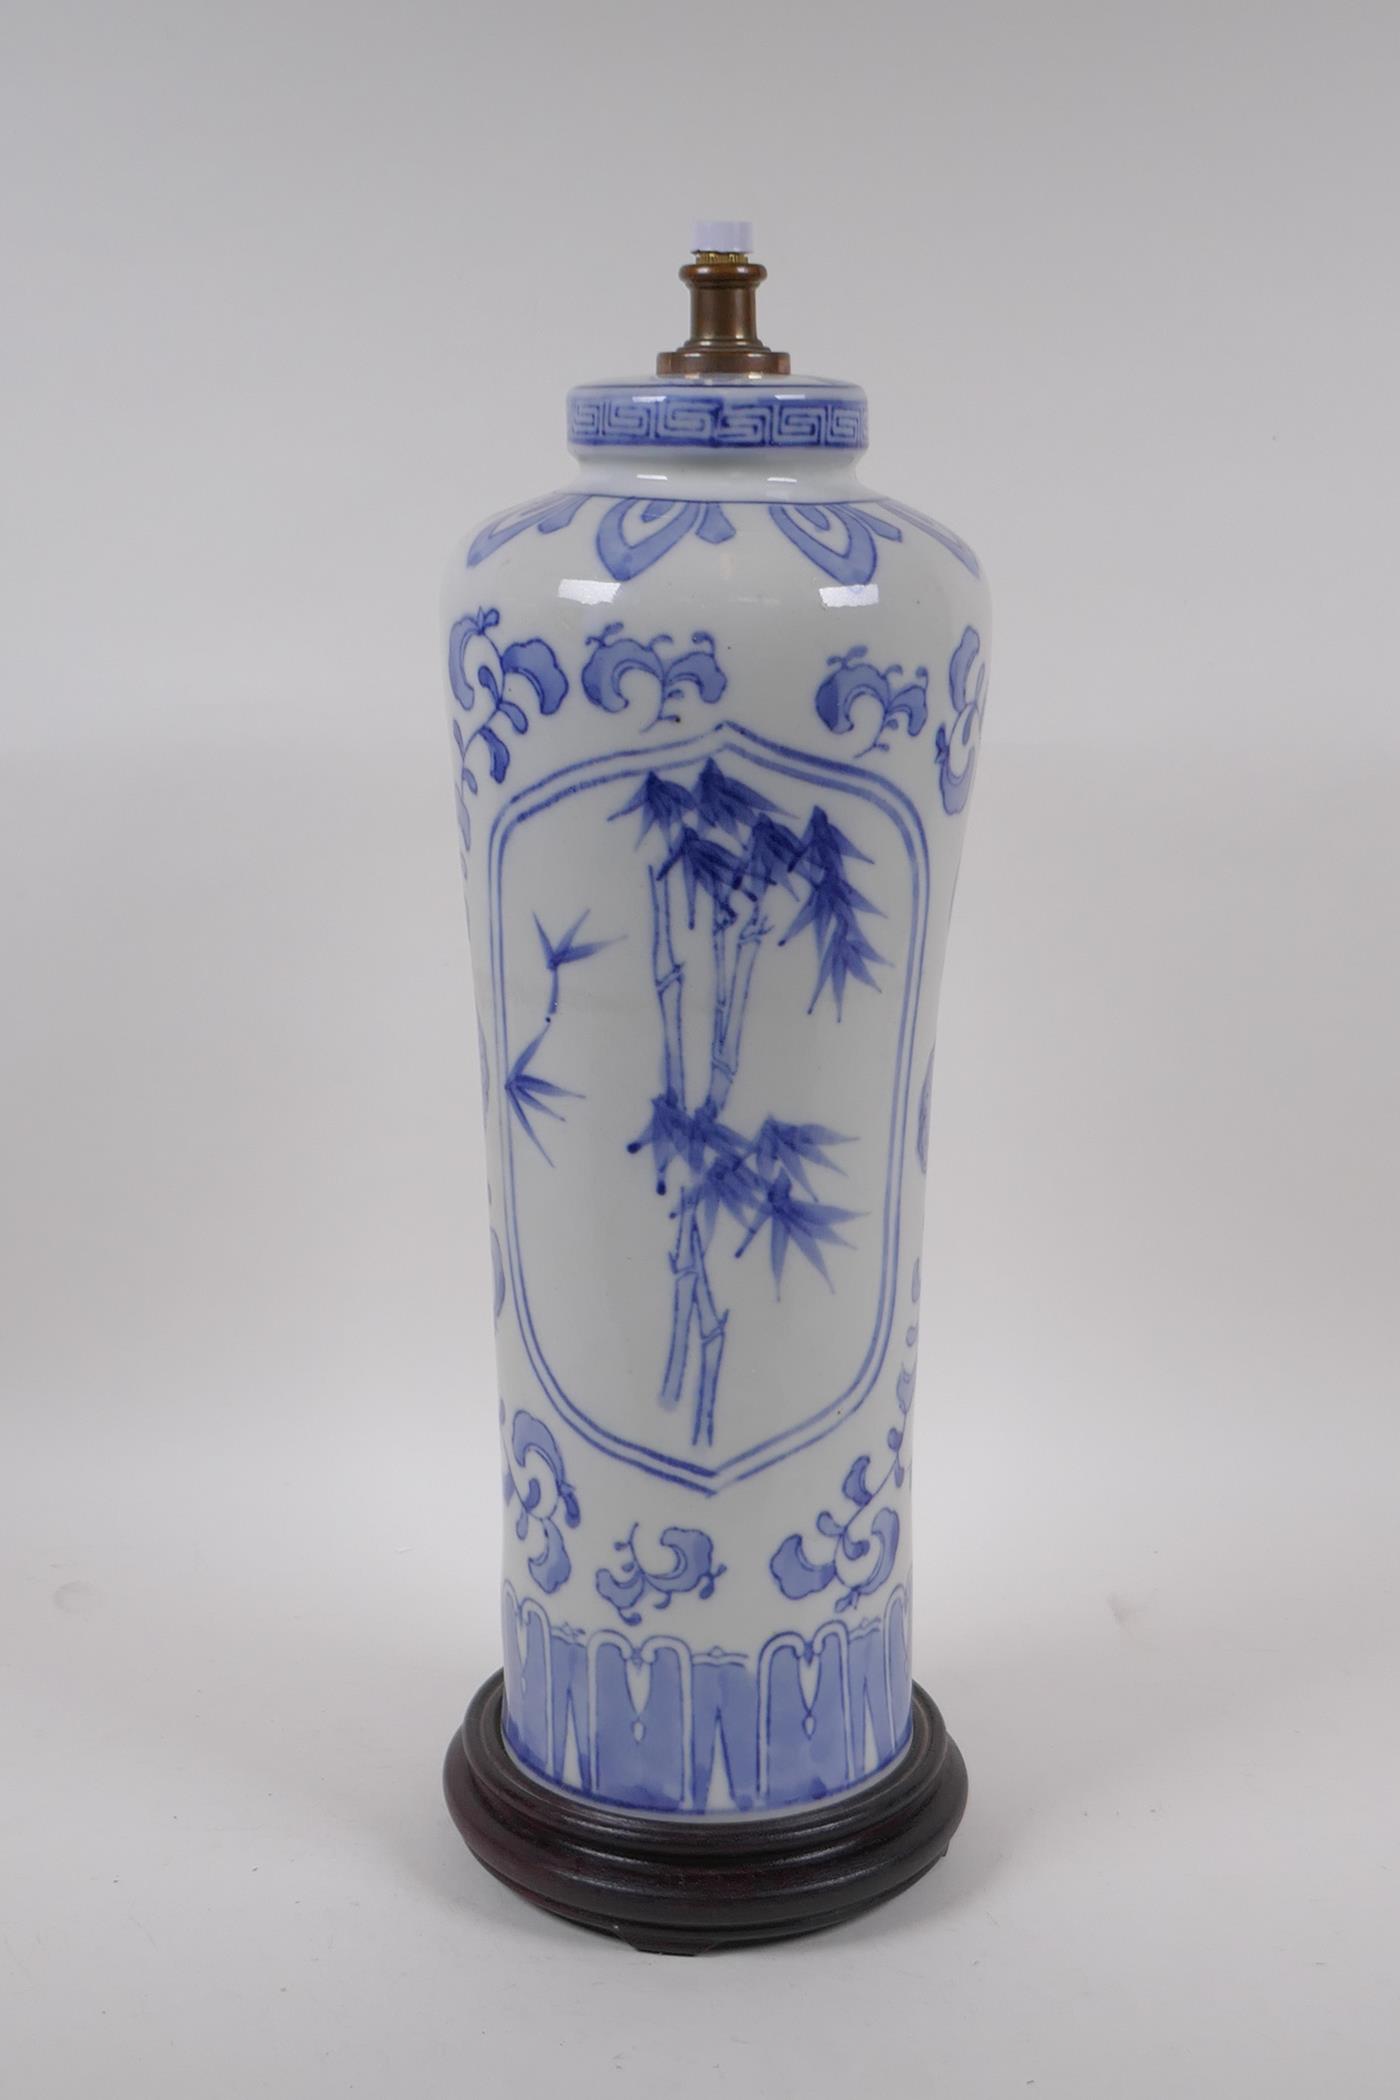 A Japanese 'Tarogo' blue and white porcelain lamp with bamboo decoration, 44cm high